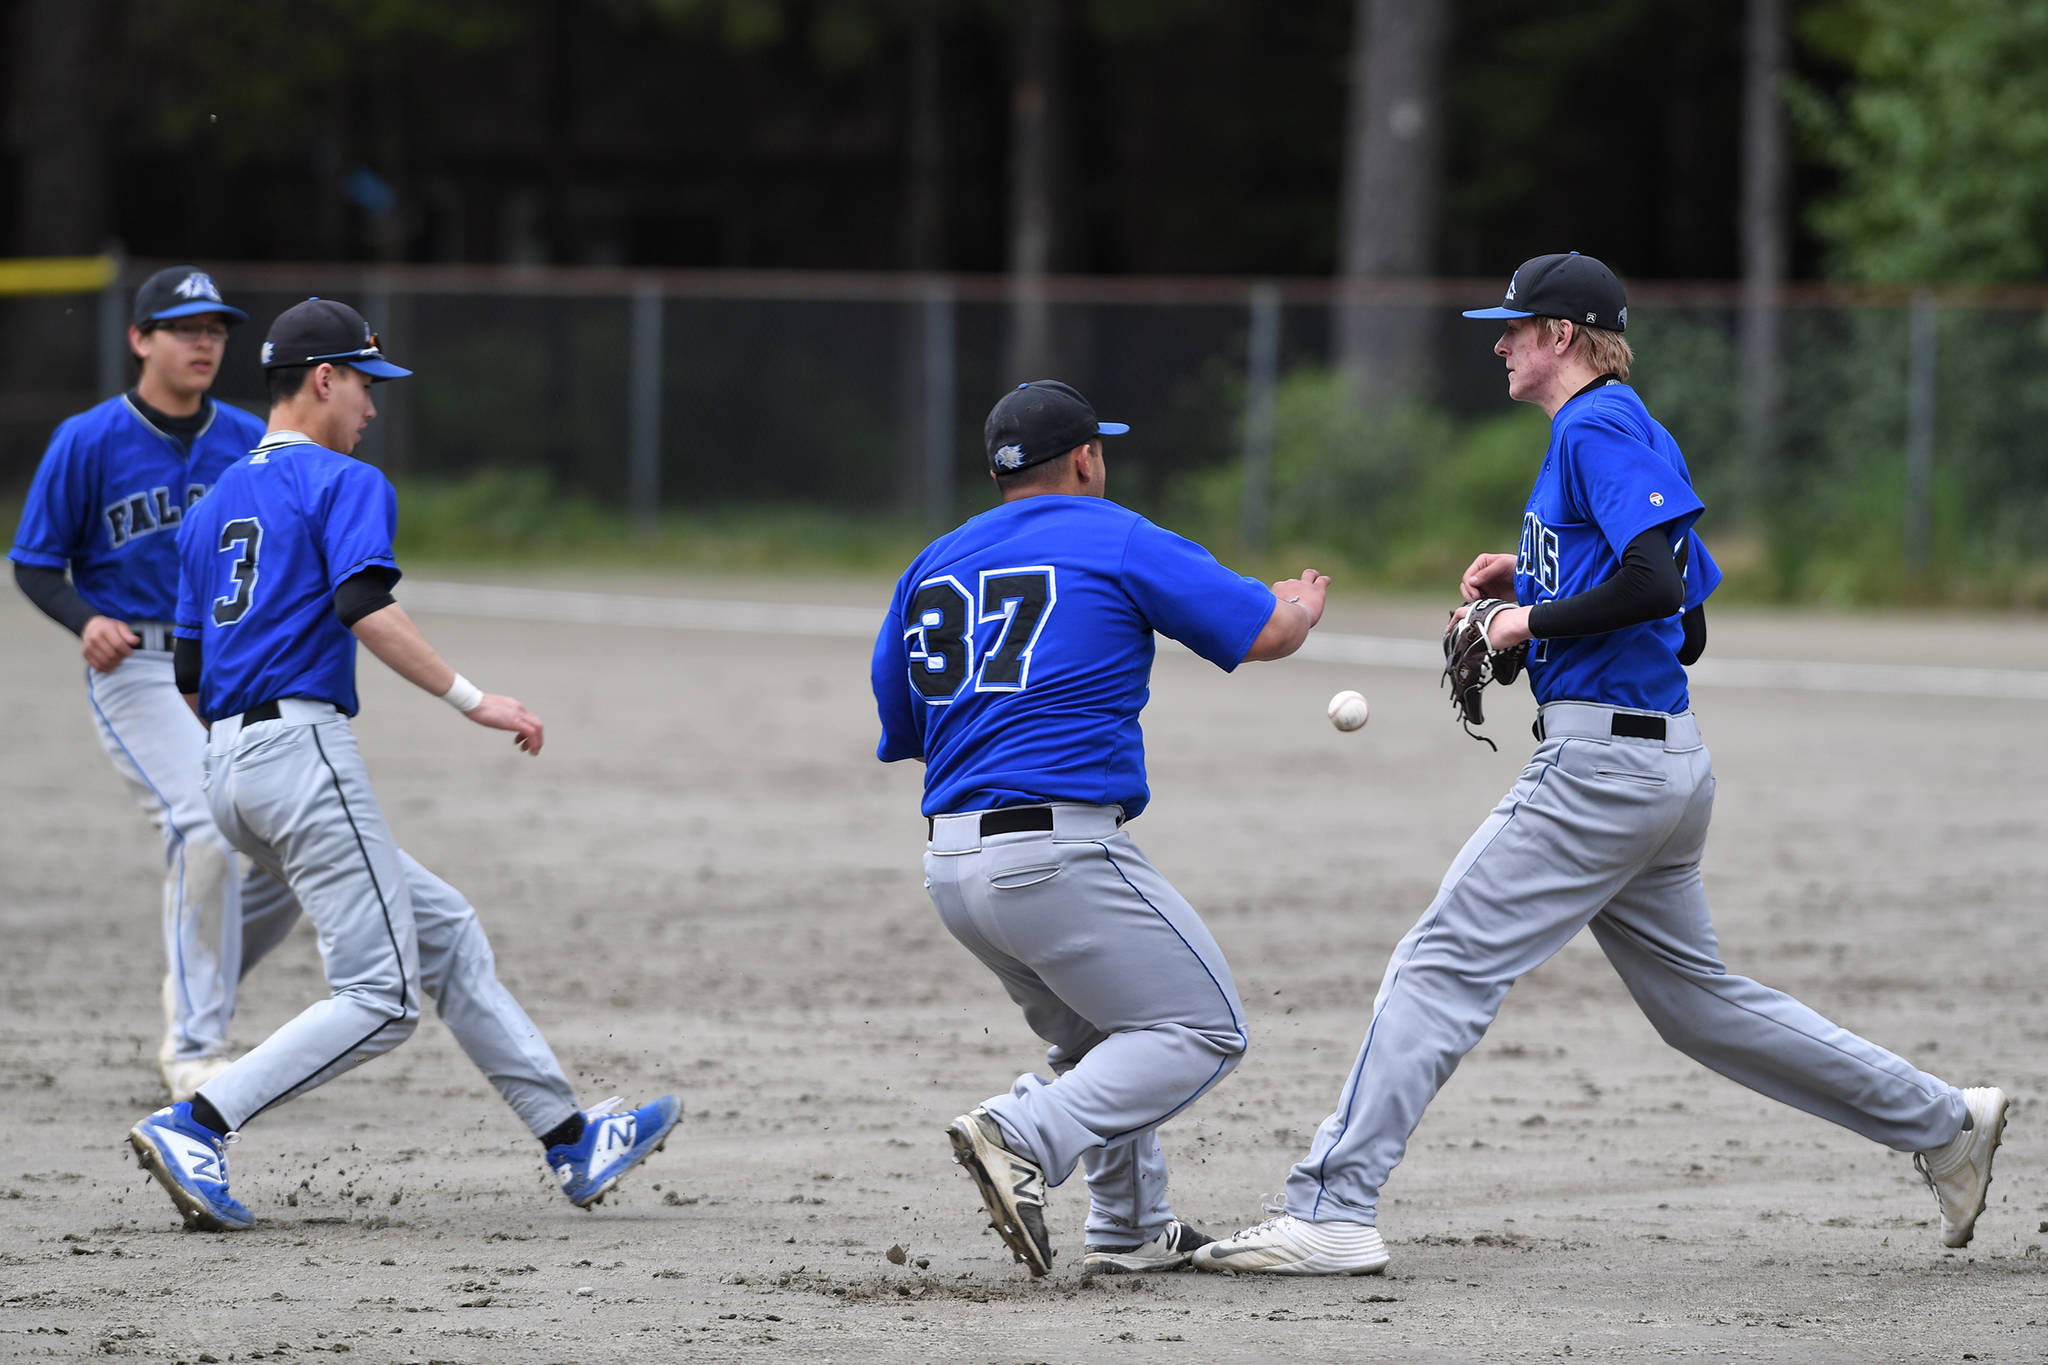 A pop-up drops between Thunder Mountain infielders as they play Sitka during the Region V Baseball Championship at Adair-Kennedy Memorial Park on Friday, May 24, 2019. TMHS lost 1-7. (Michael Penn | Juneau Empire)